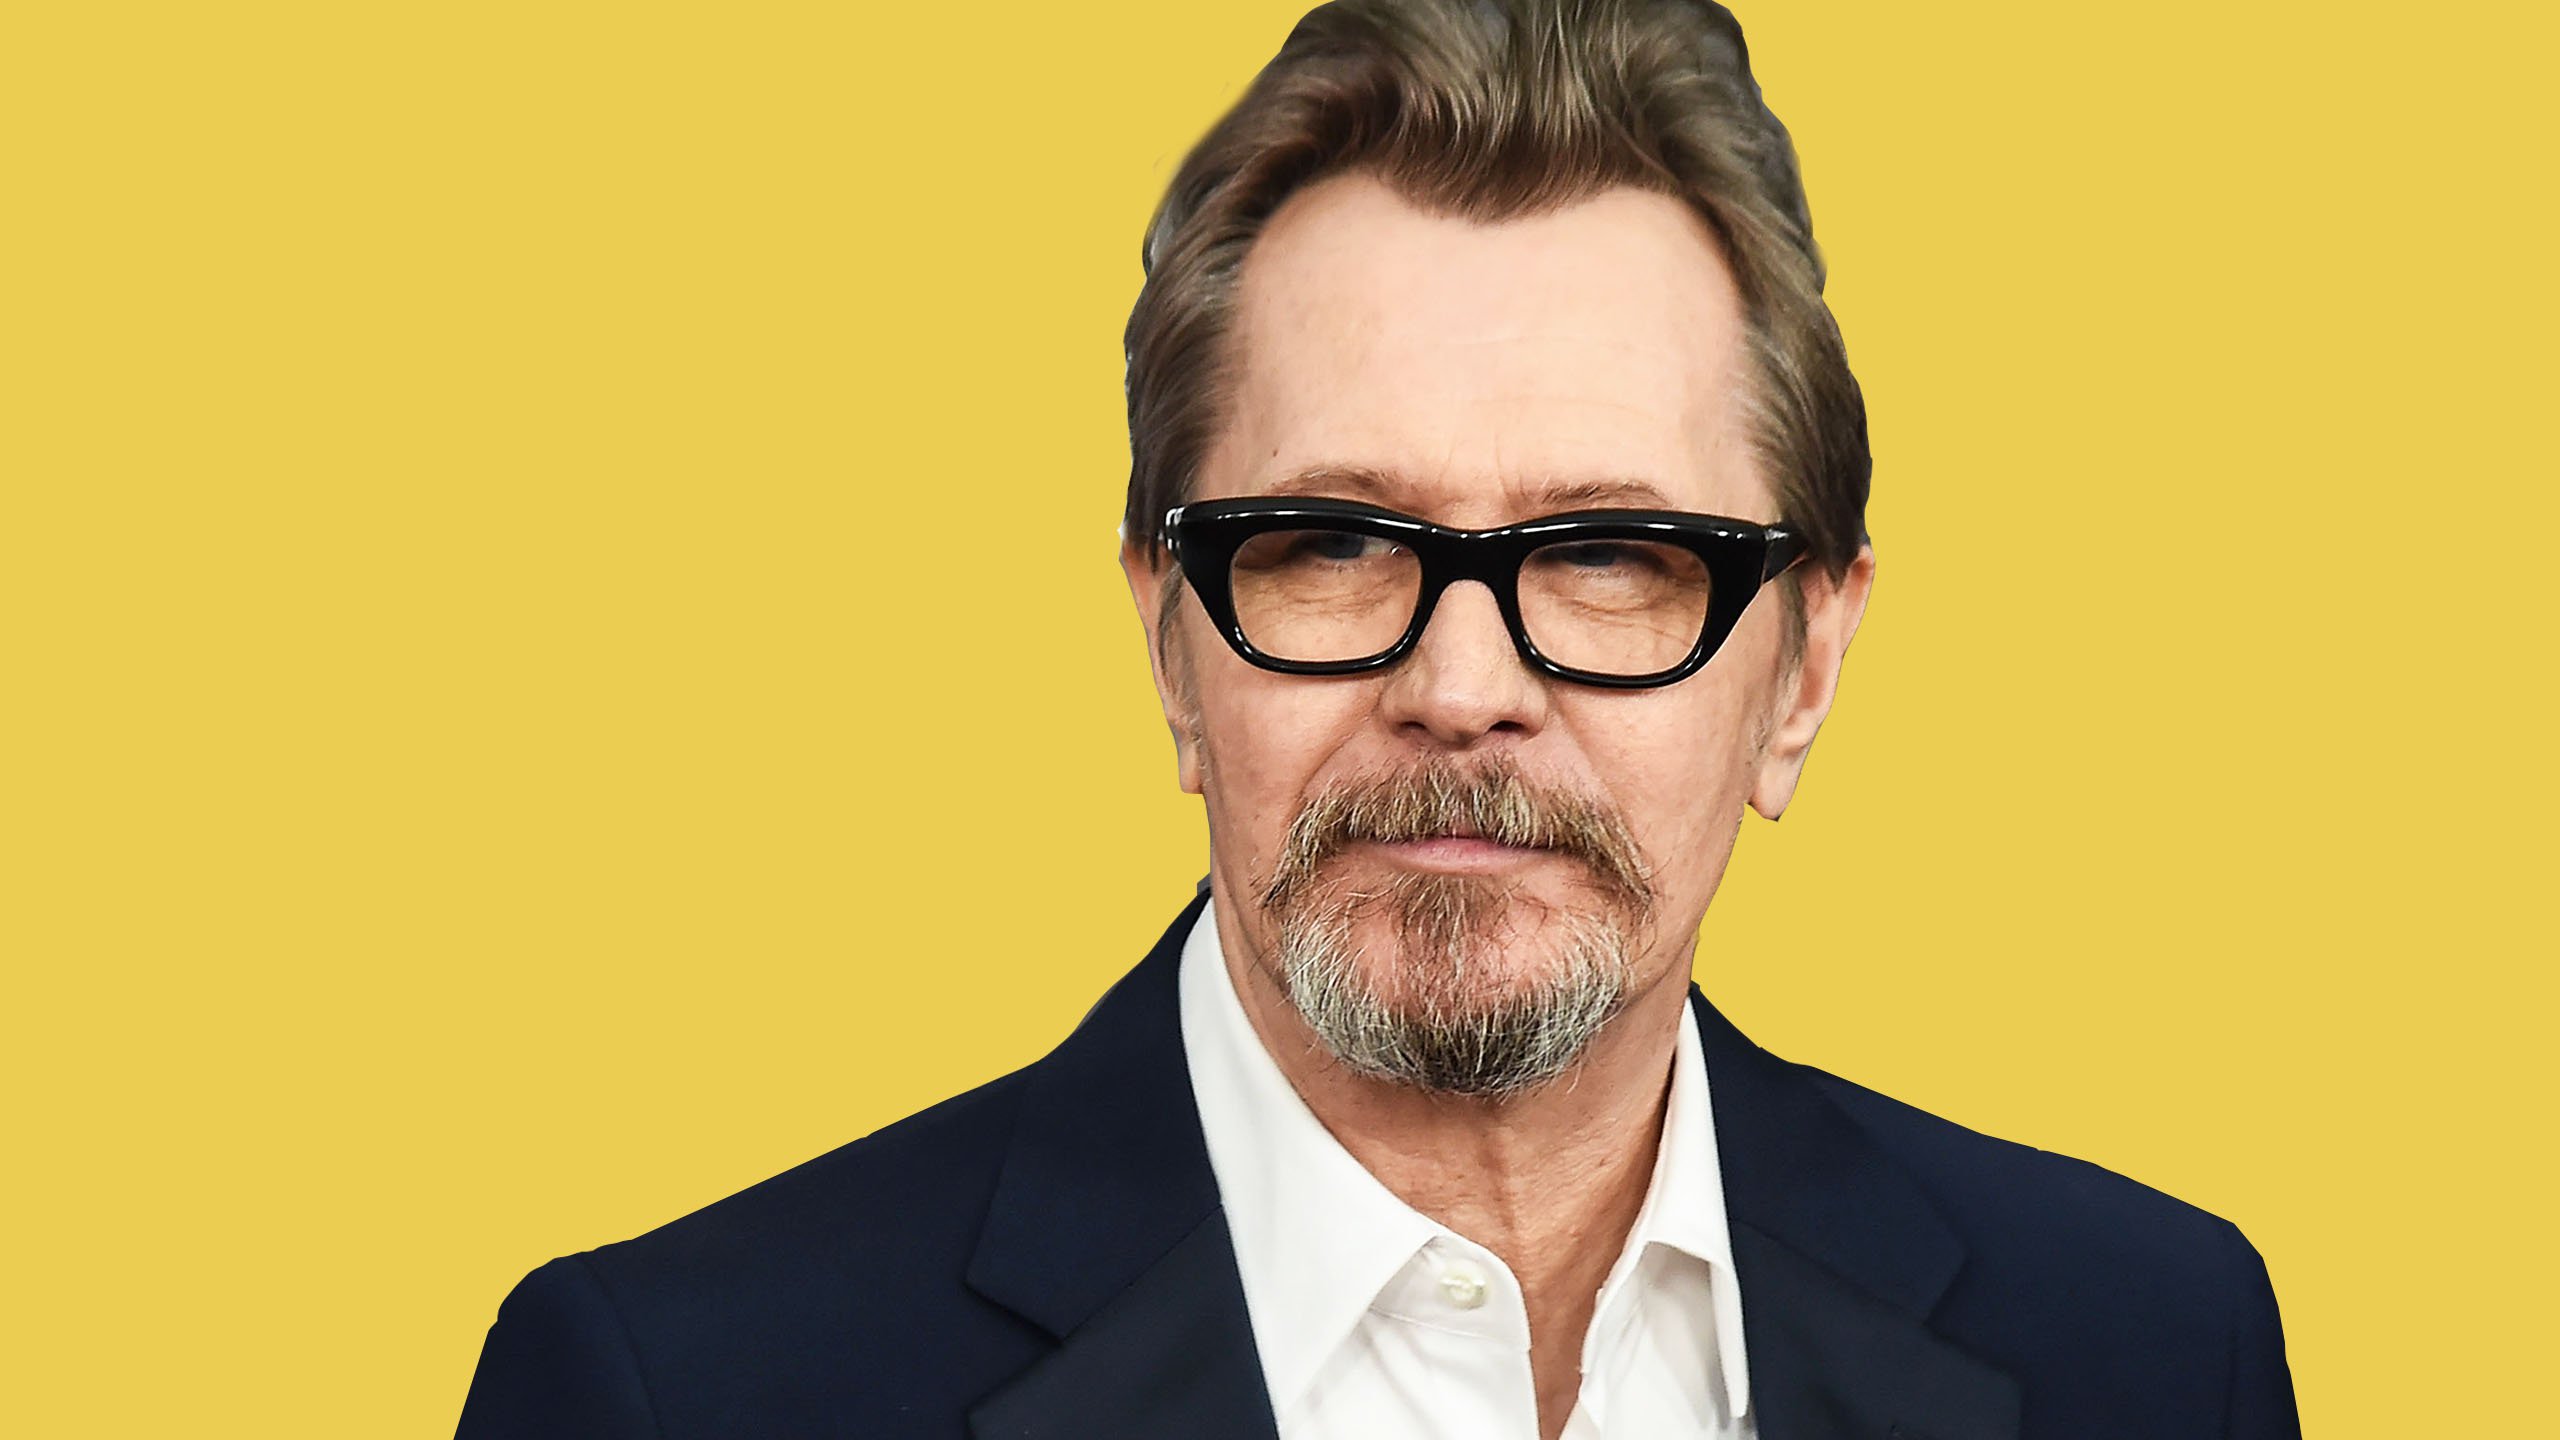 Gary Oldman: The Oscar Frontrunner With a Dark Past